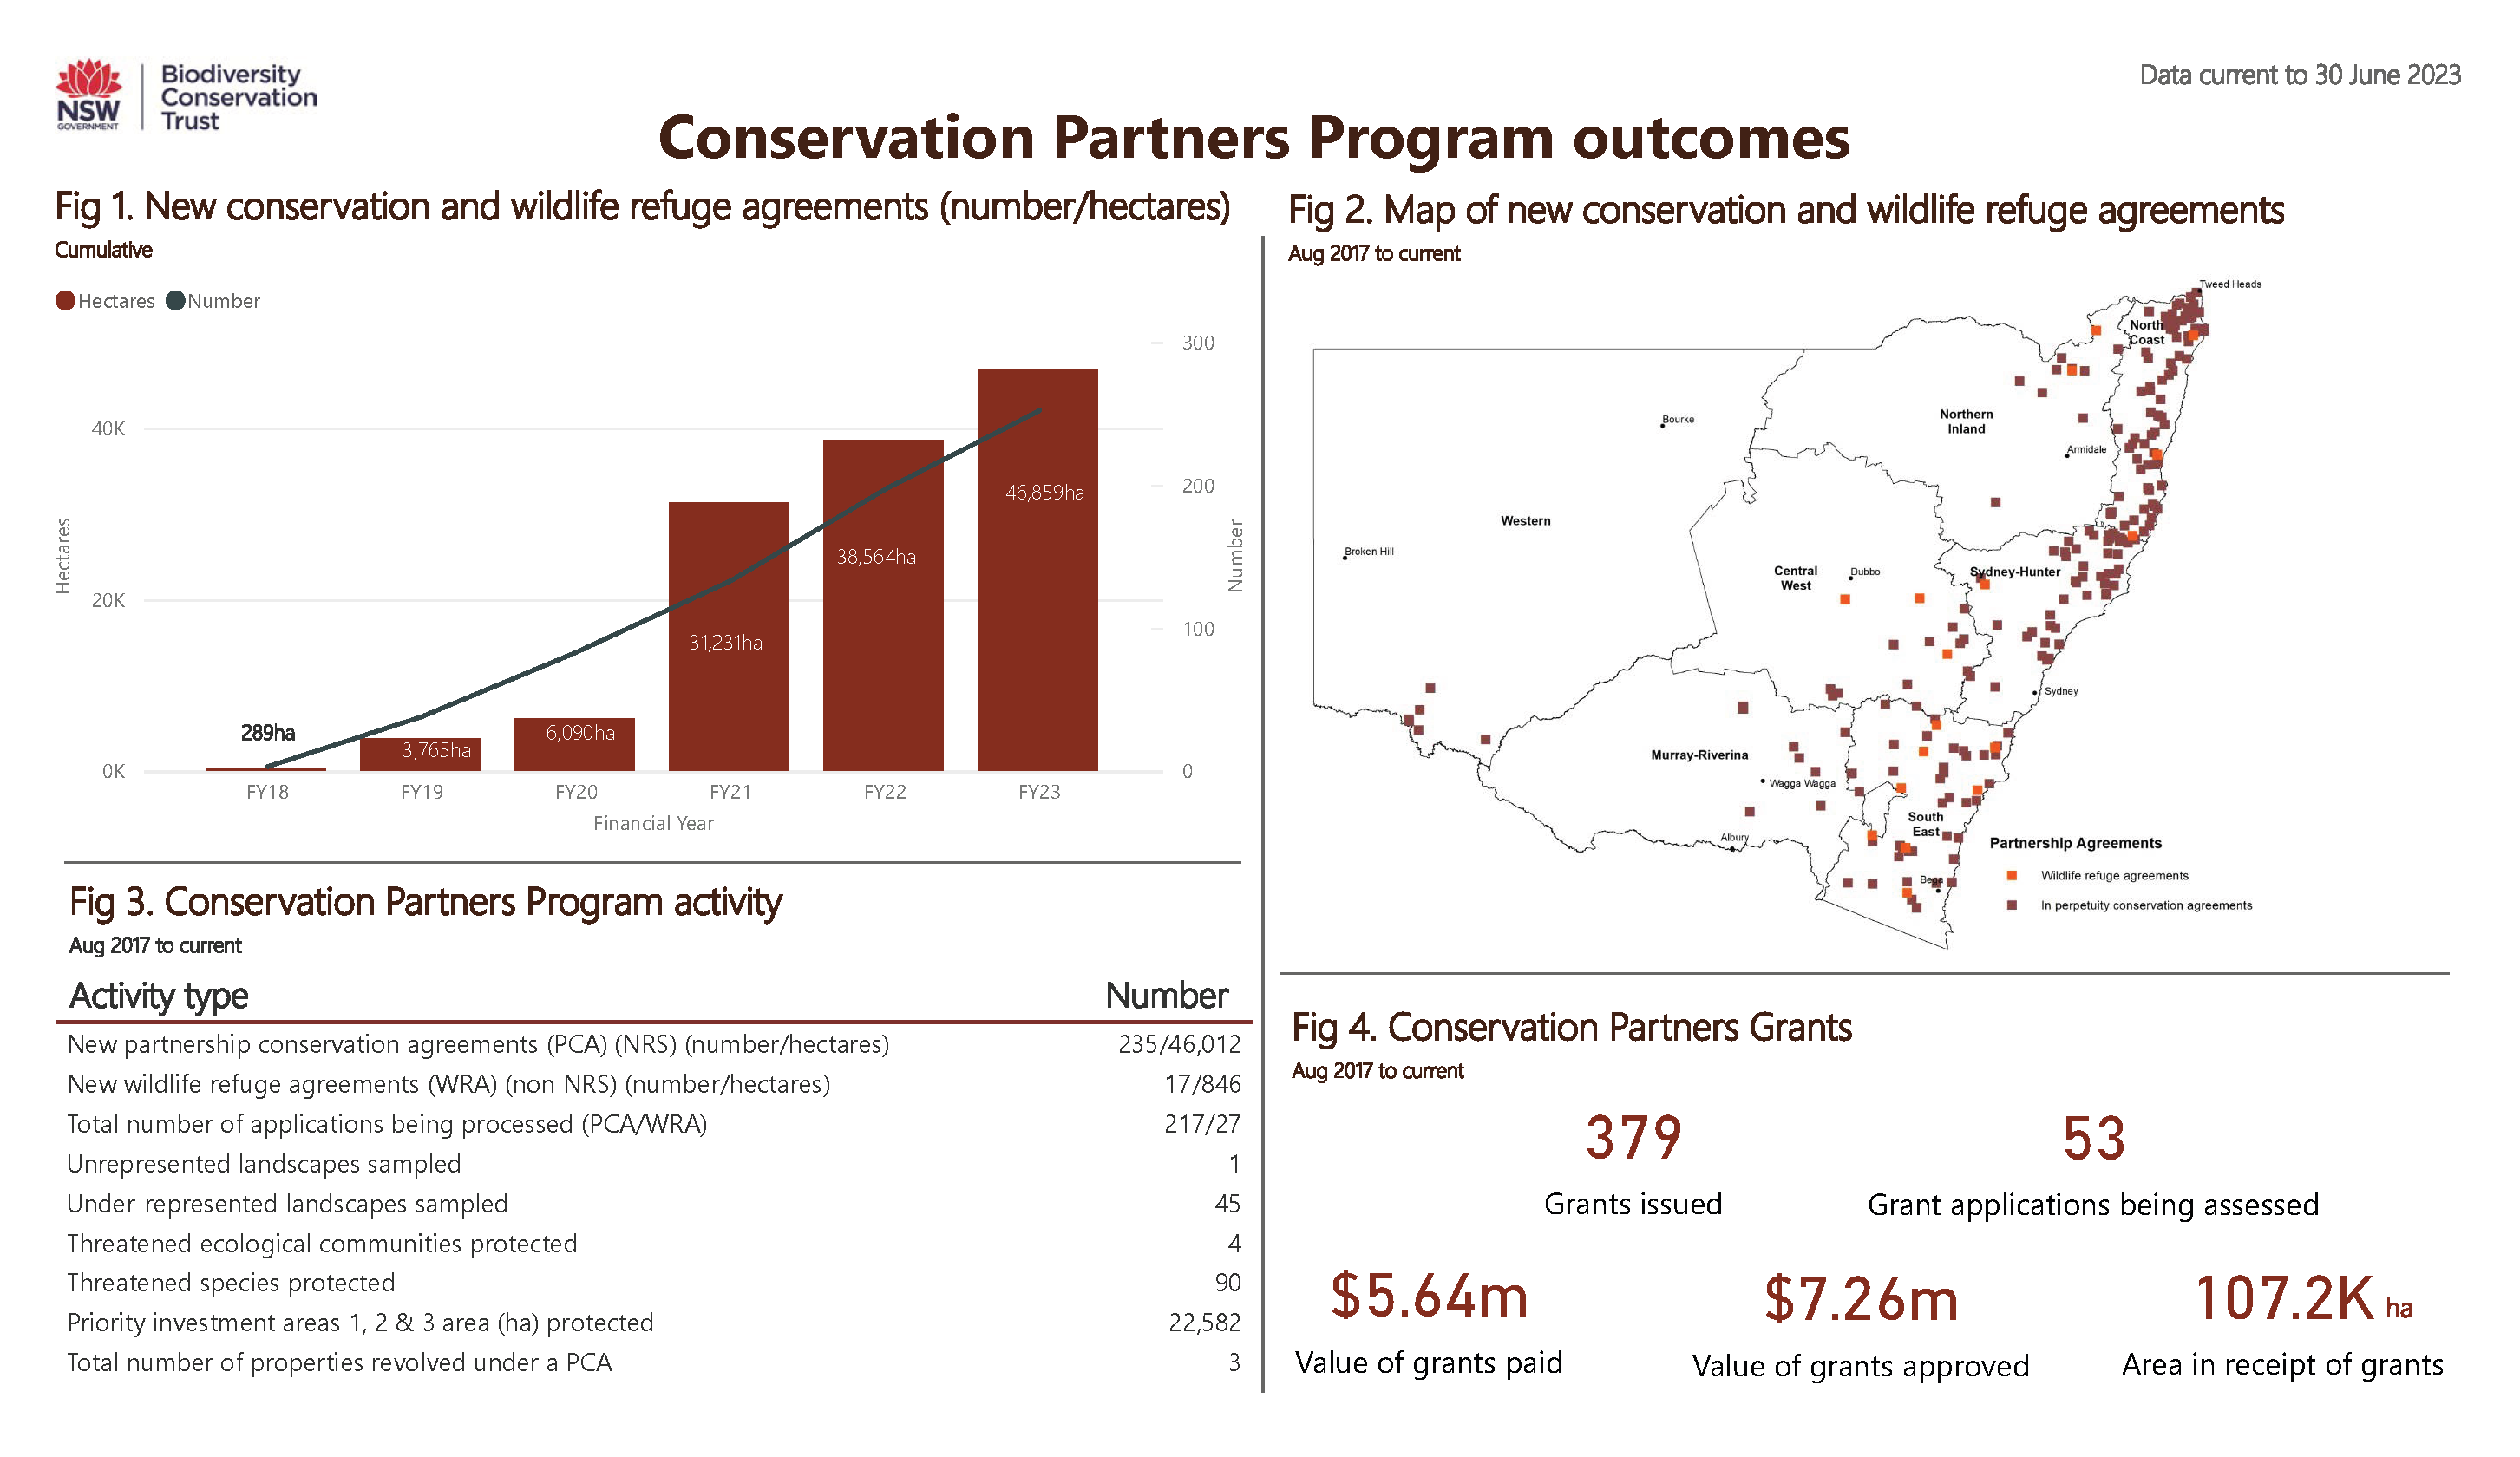 Conservation Partners Program dashboard data as at 30 June 2023